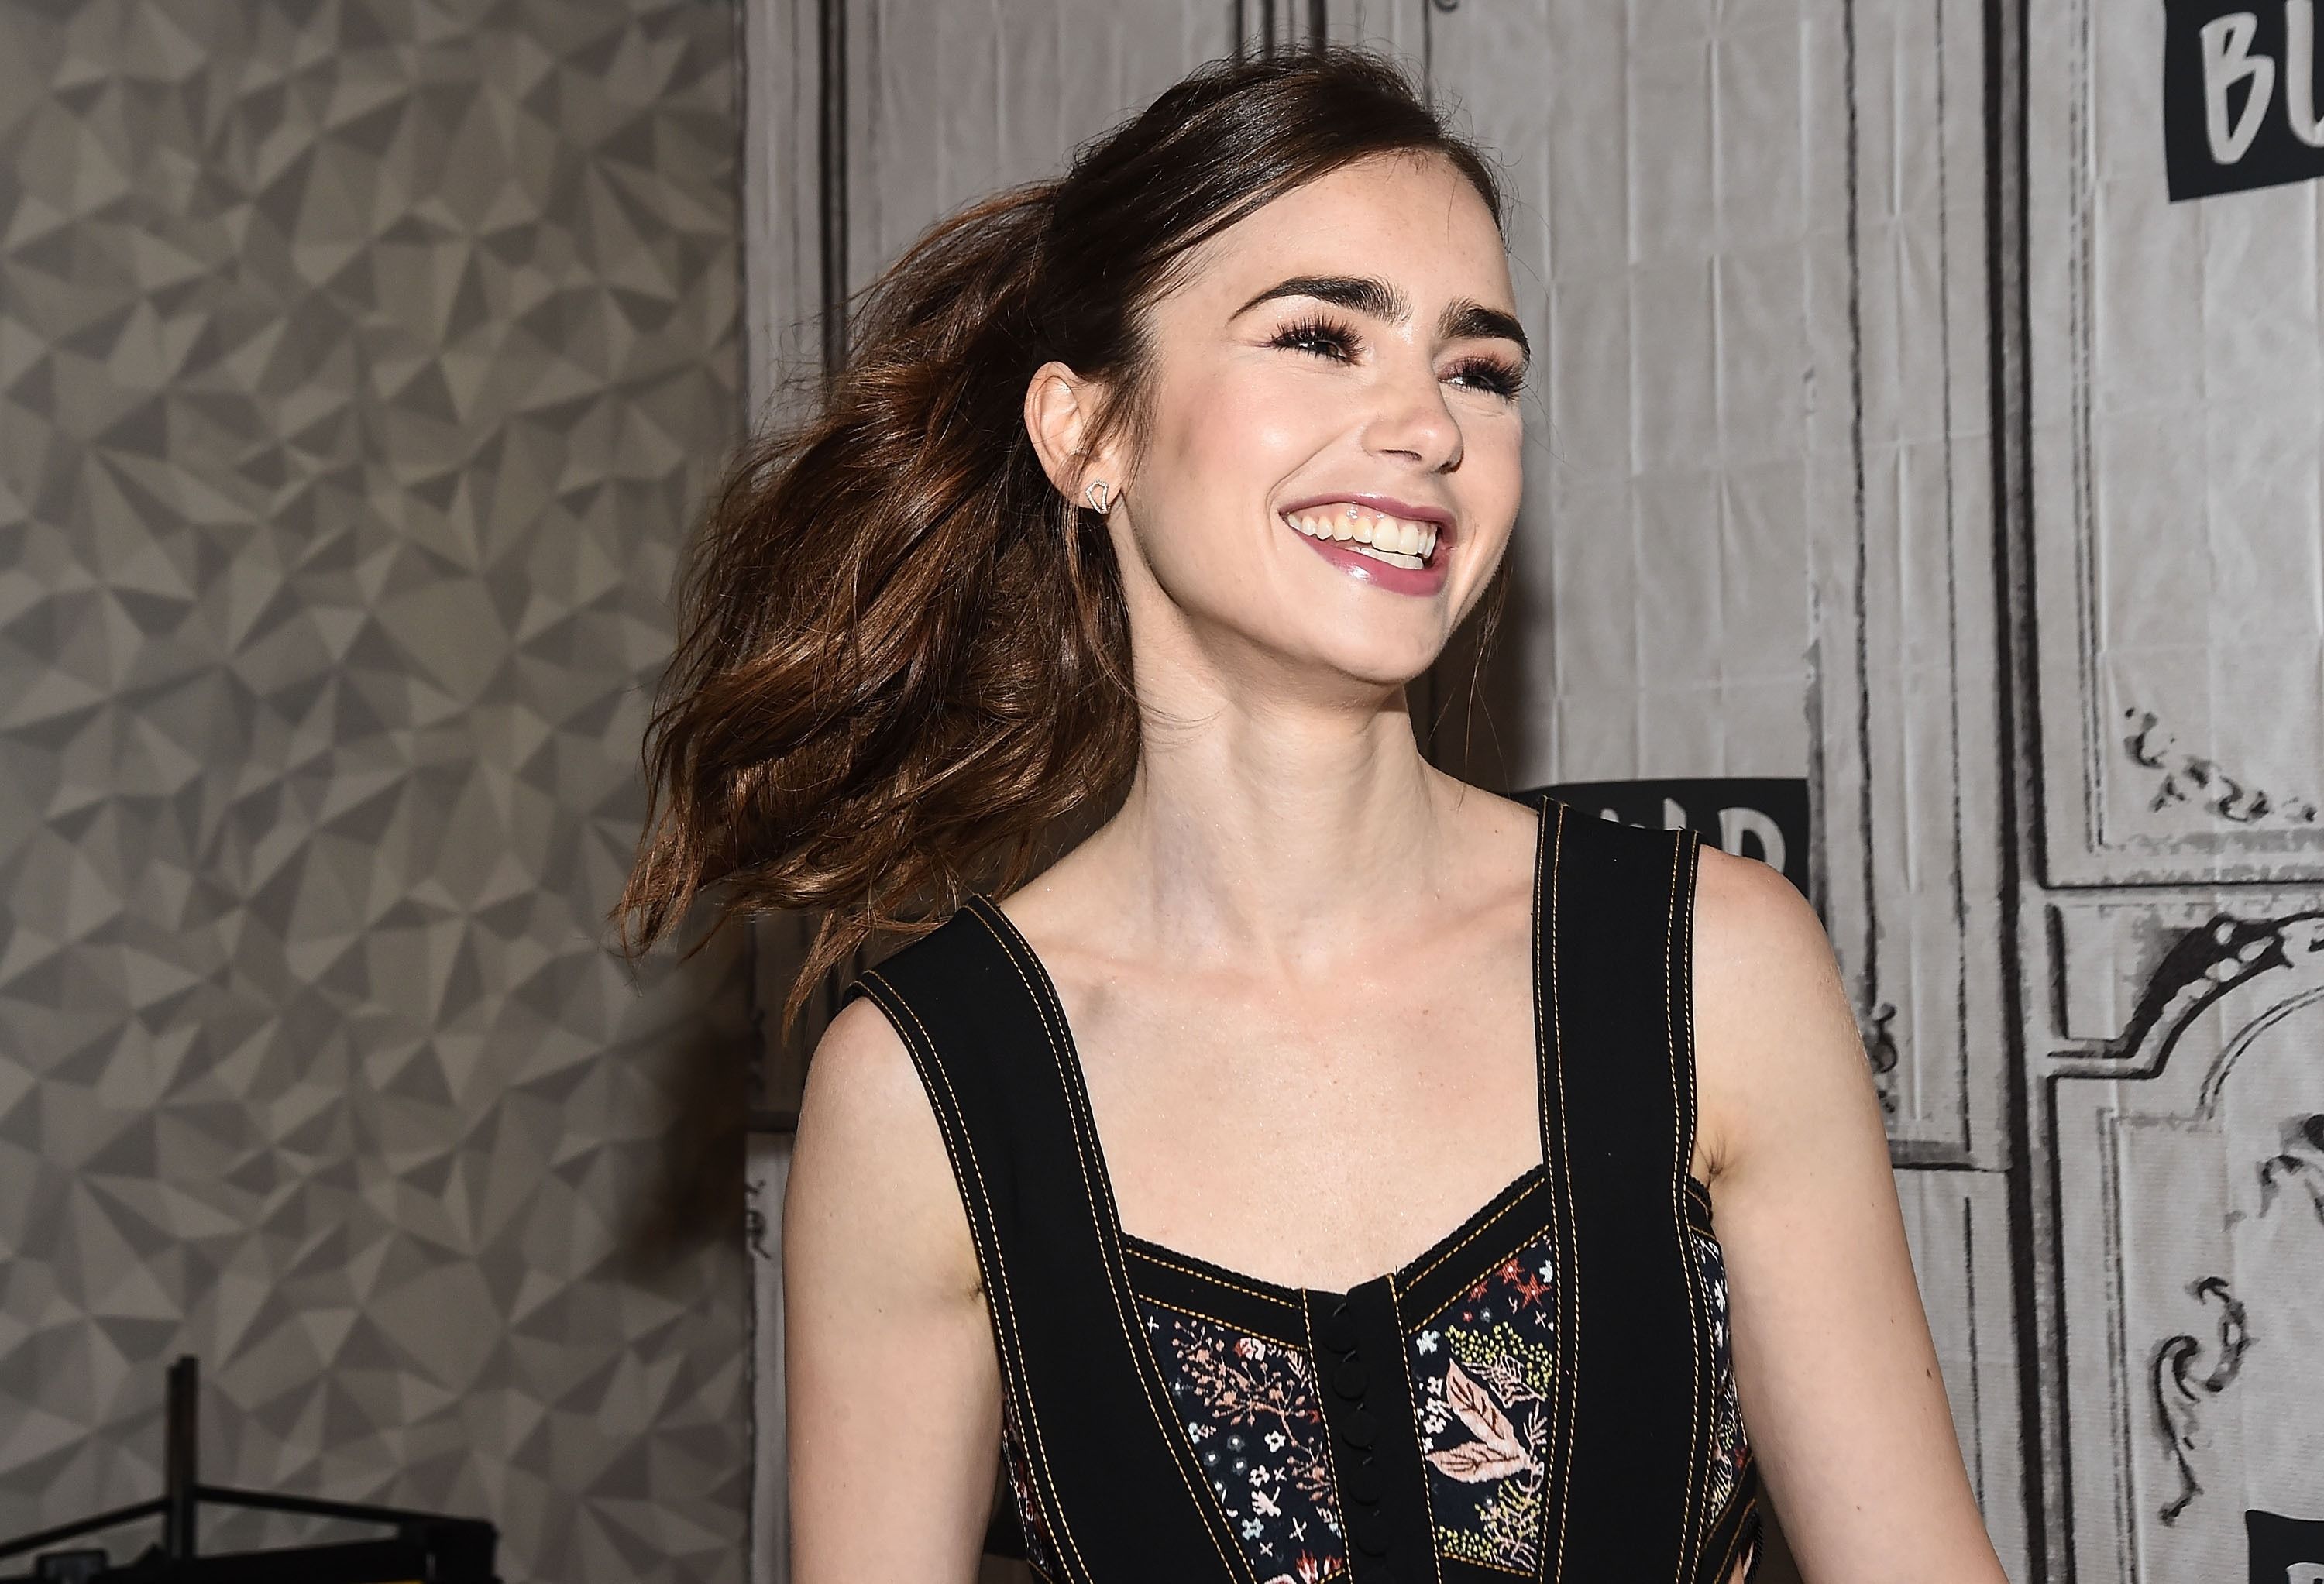 Lily Collins Returns From Paris with Fashionable Prada Bag: Photo 3203885, Lily Collins Photos